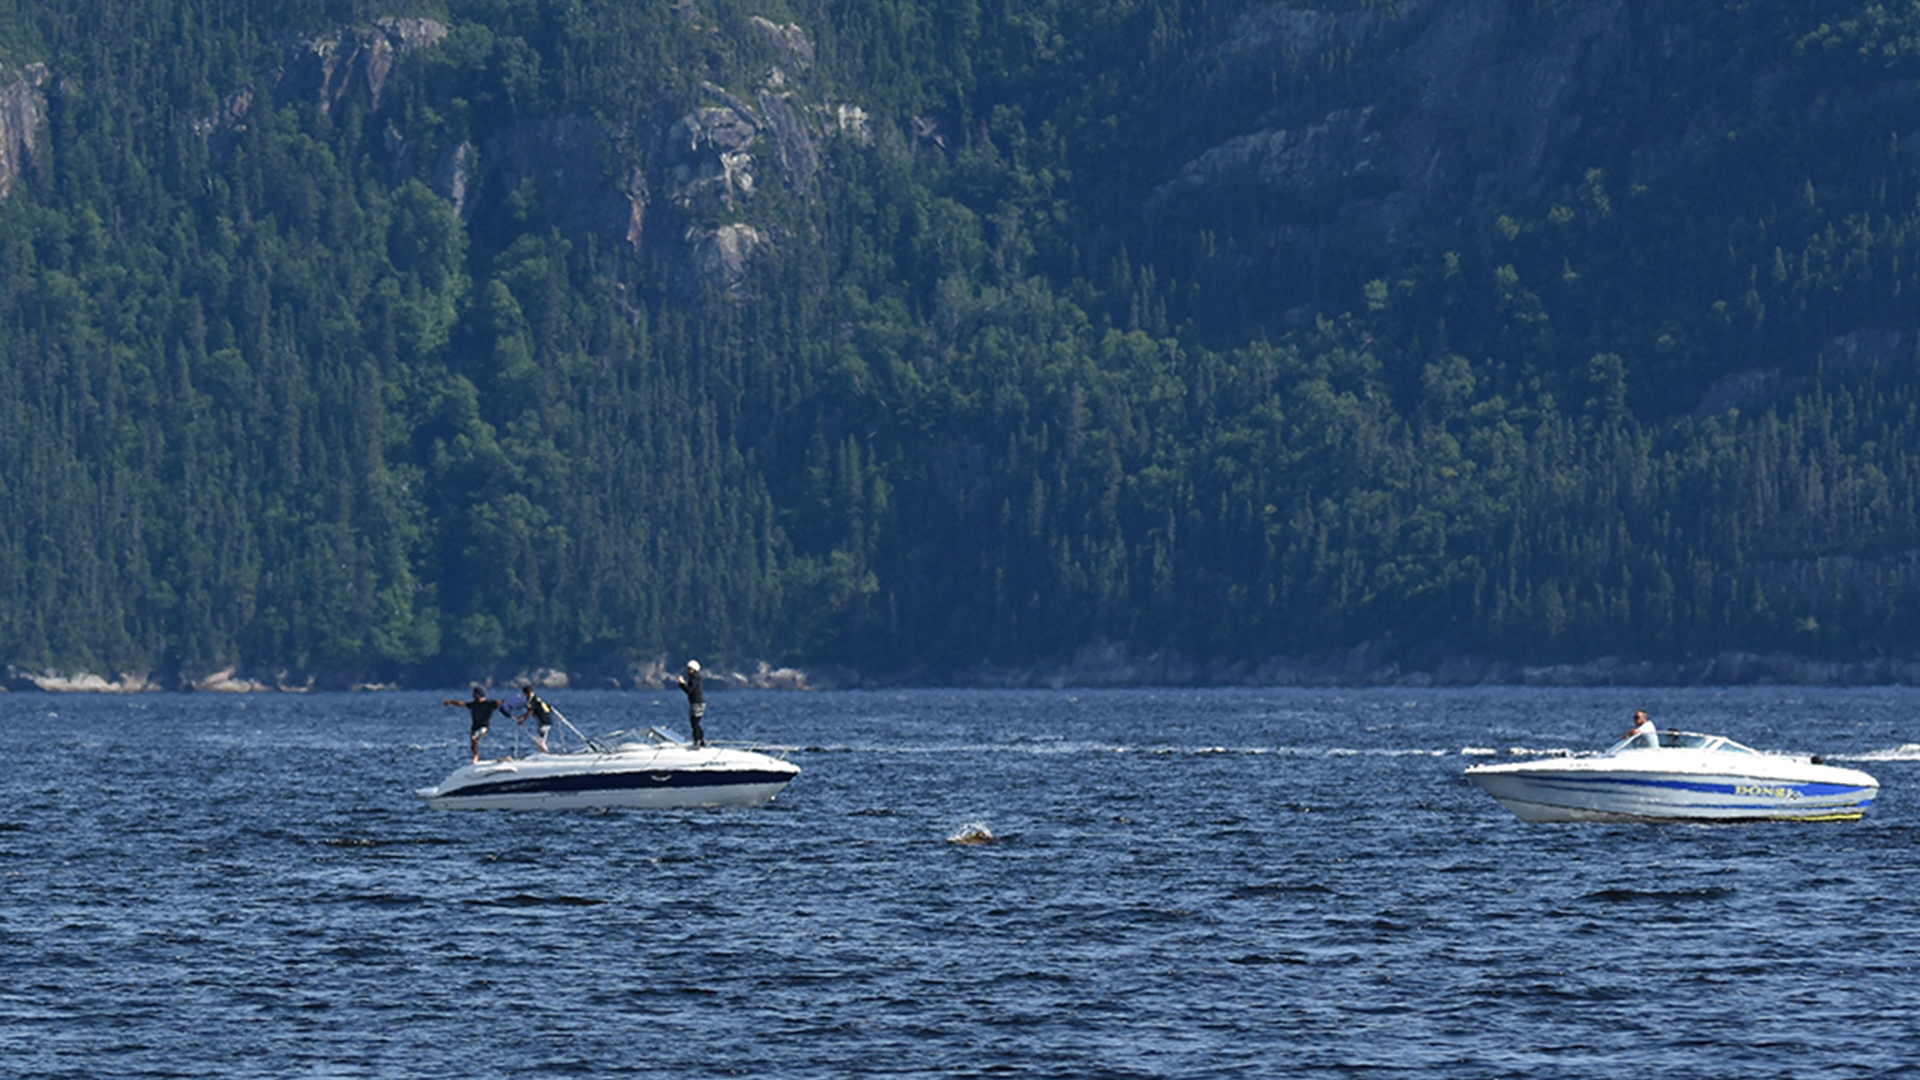 Two pleasure boats in the Saguenay Fjord